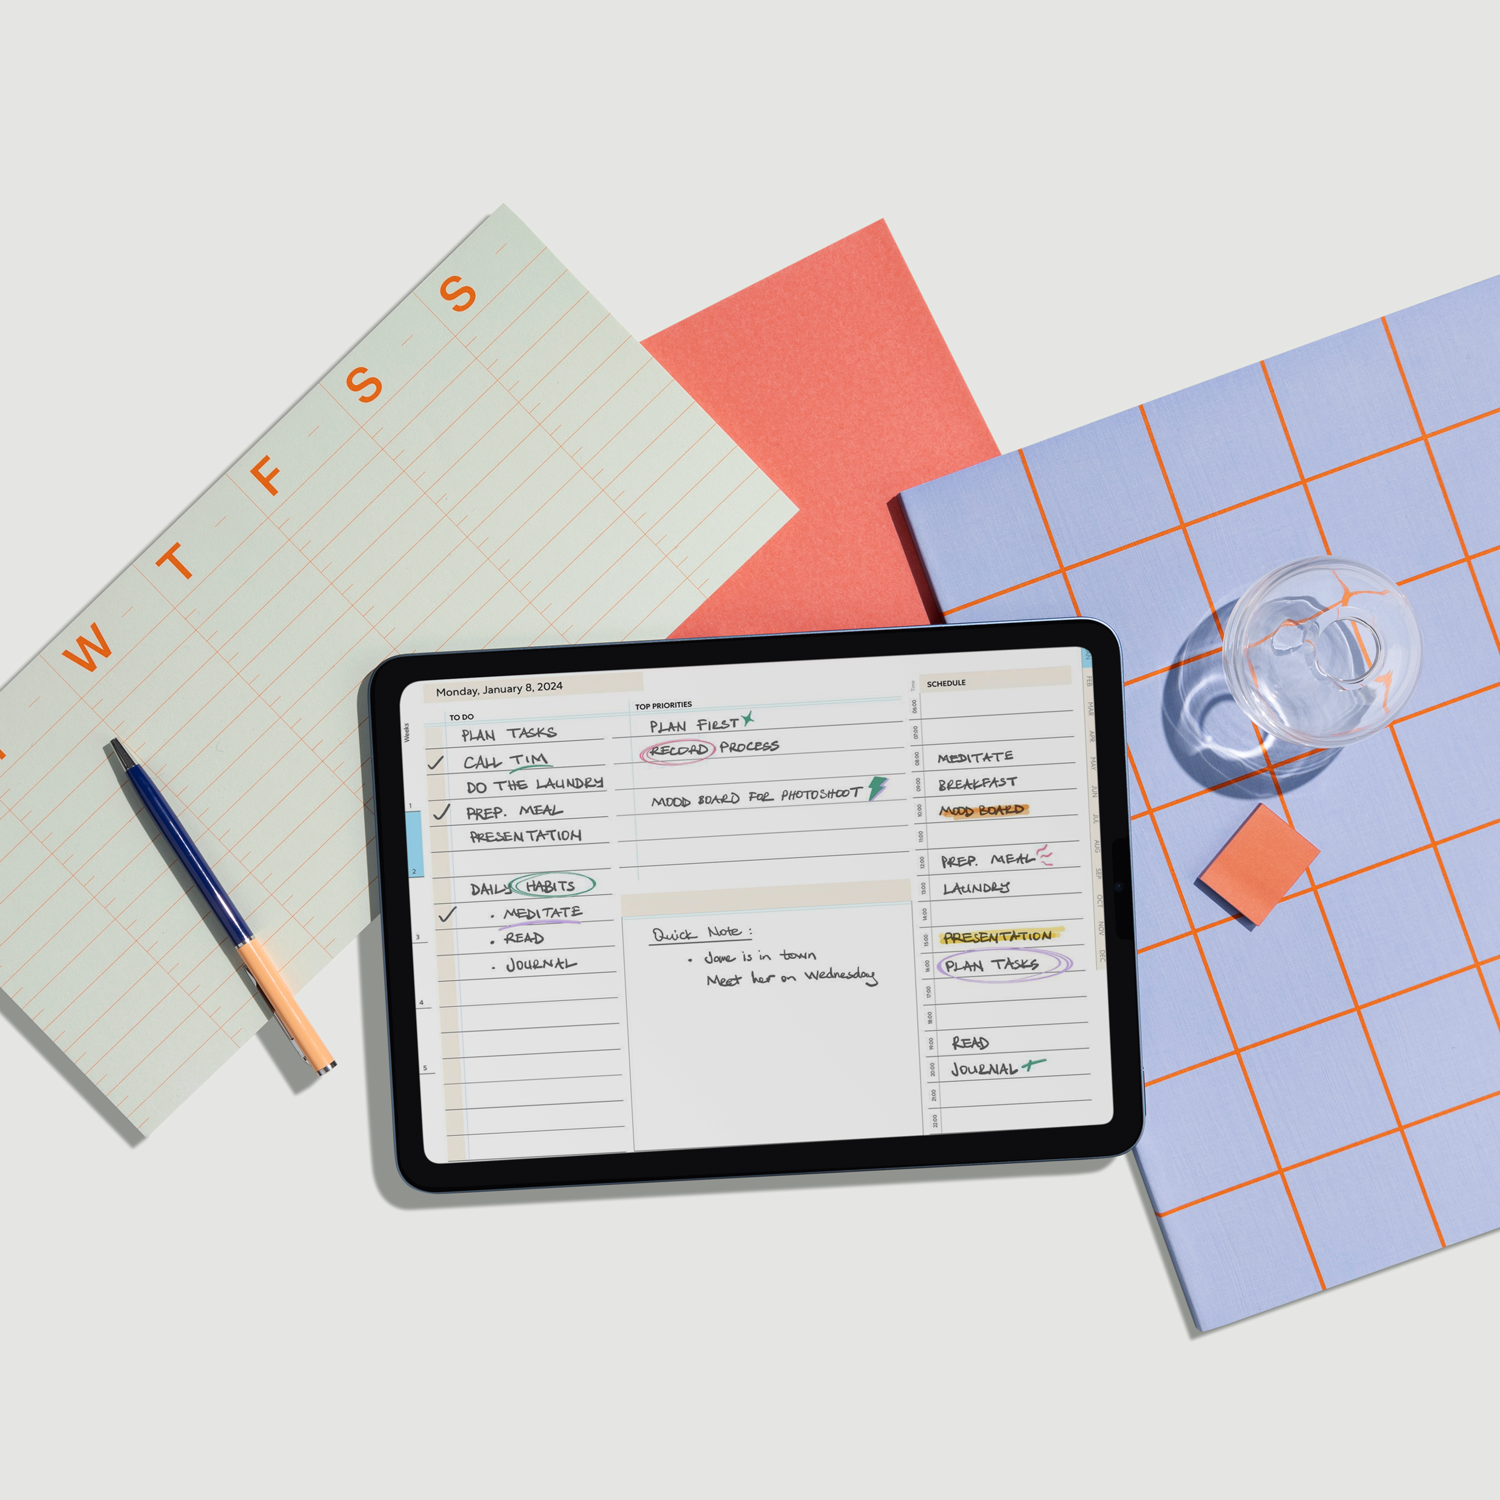 Paperlike's Pro Digital Planner for prioritizing, notetaking, goal tracking, and to-do's. Compatible with Goodnotes and Notability.